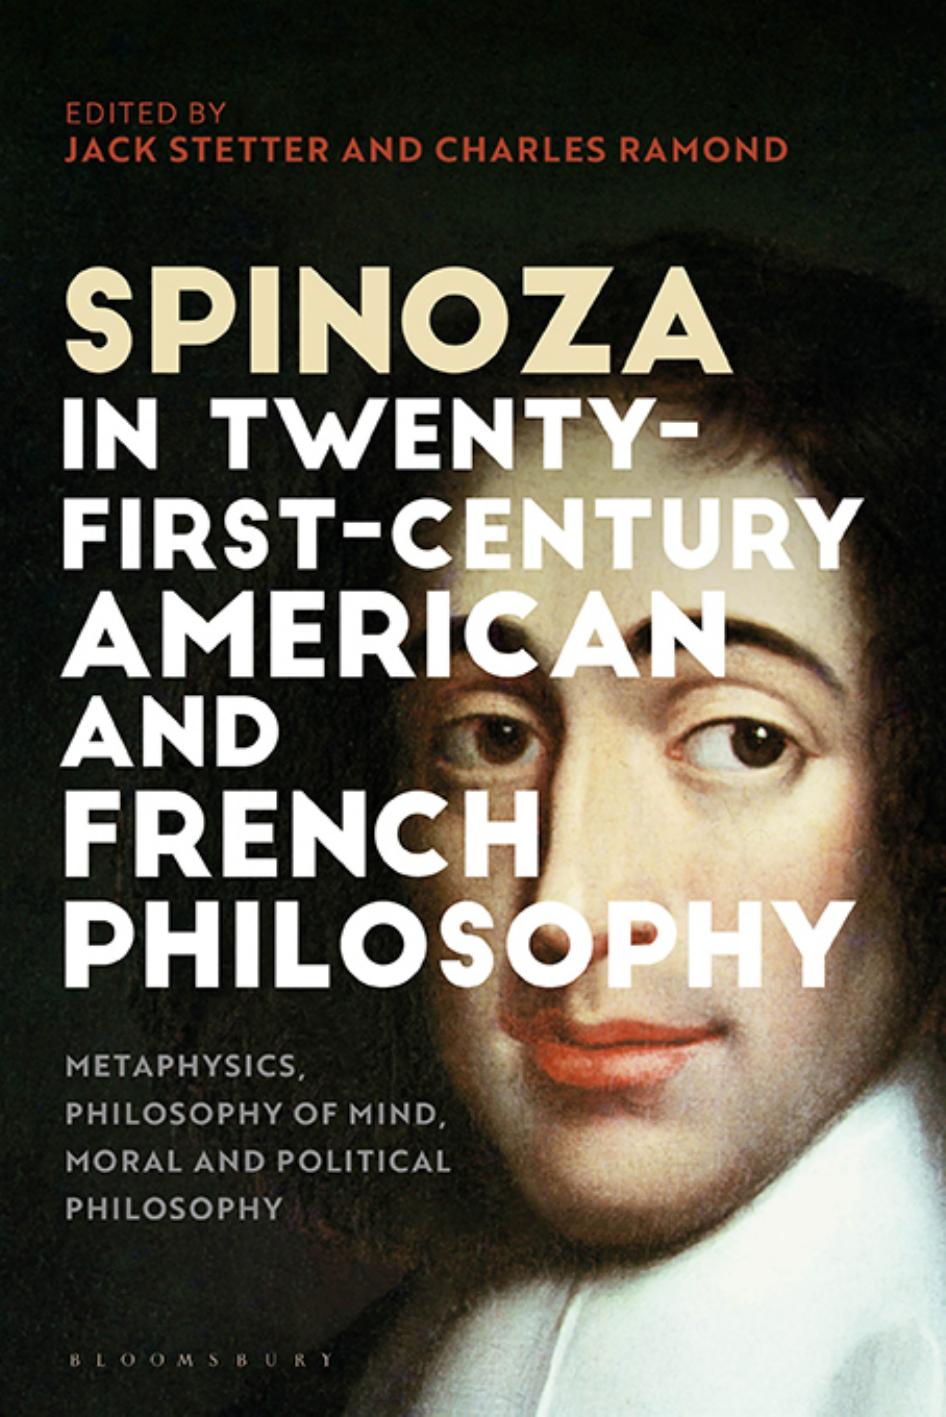 Spinoza in Twenty-First-Century American and French Philosophy: Metaphysics, Philosophy of Mind, Moral and Political Philosophy